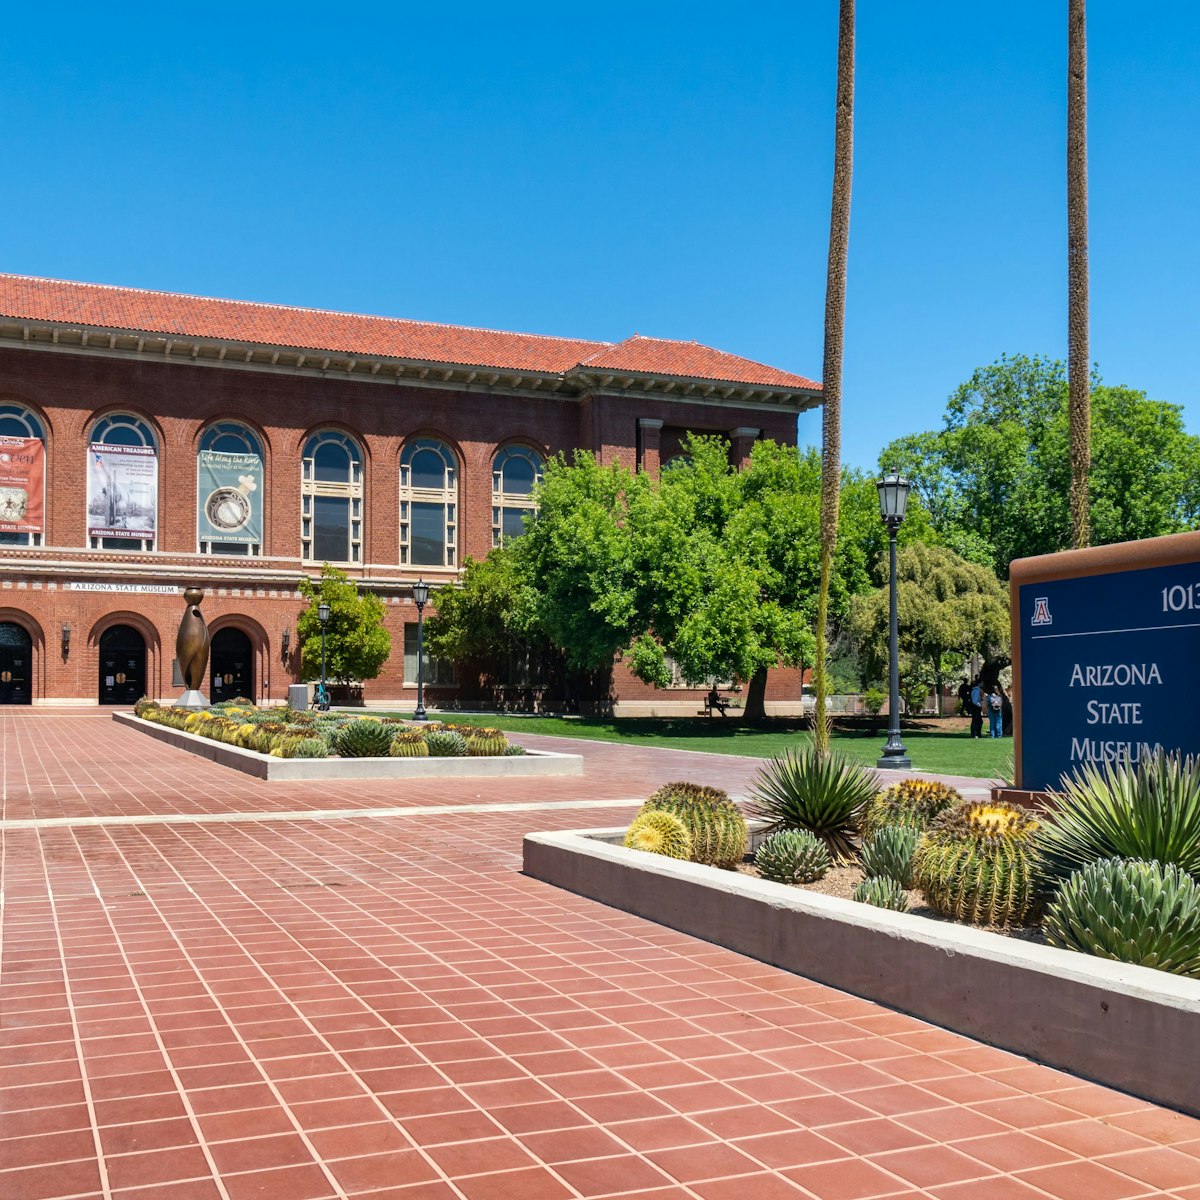 TUCSON, AZ/USA - APRIL 11, 2019: Arizona State Museum on the campus of the University of Arizona.; Shutterstock ID 1433095772; your: Bridget Brown; gl: 65050; netsuite: Online Editorial; full: POI Image Update